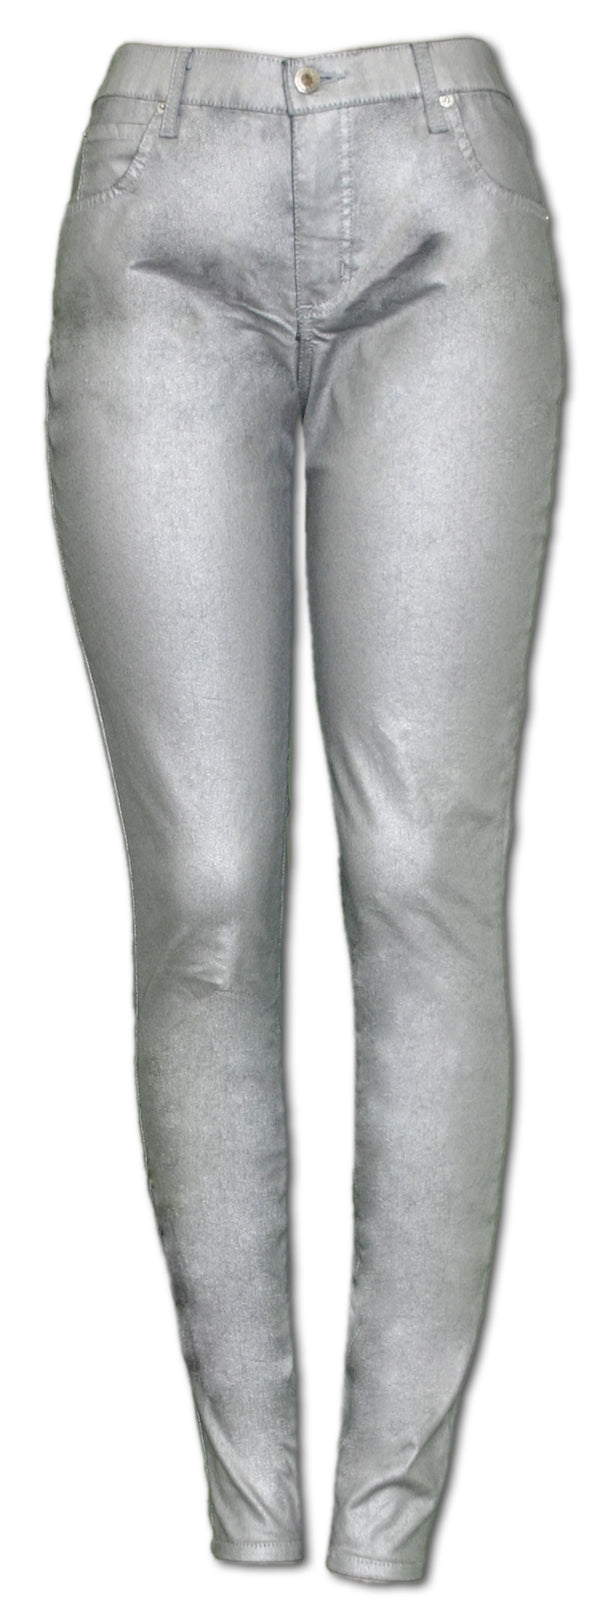 Womens Coated Jeggings